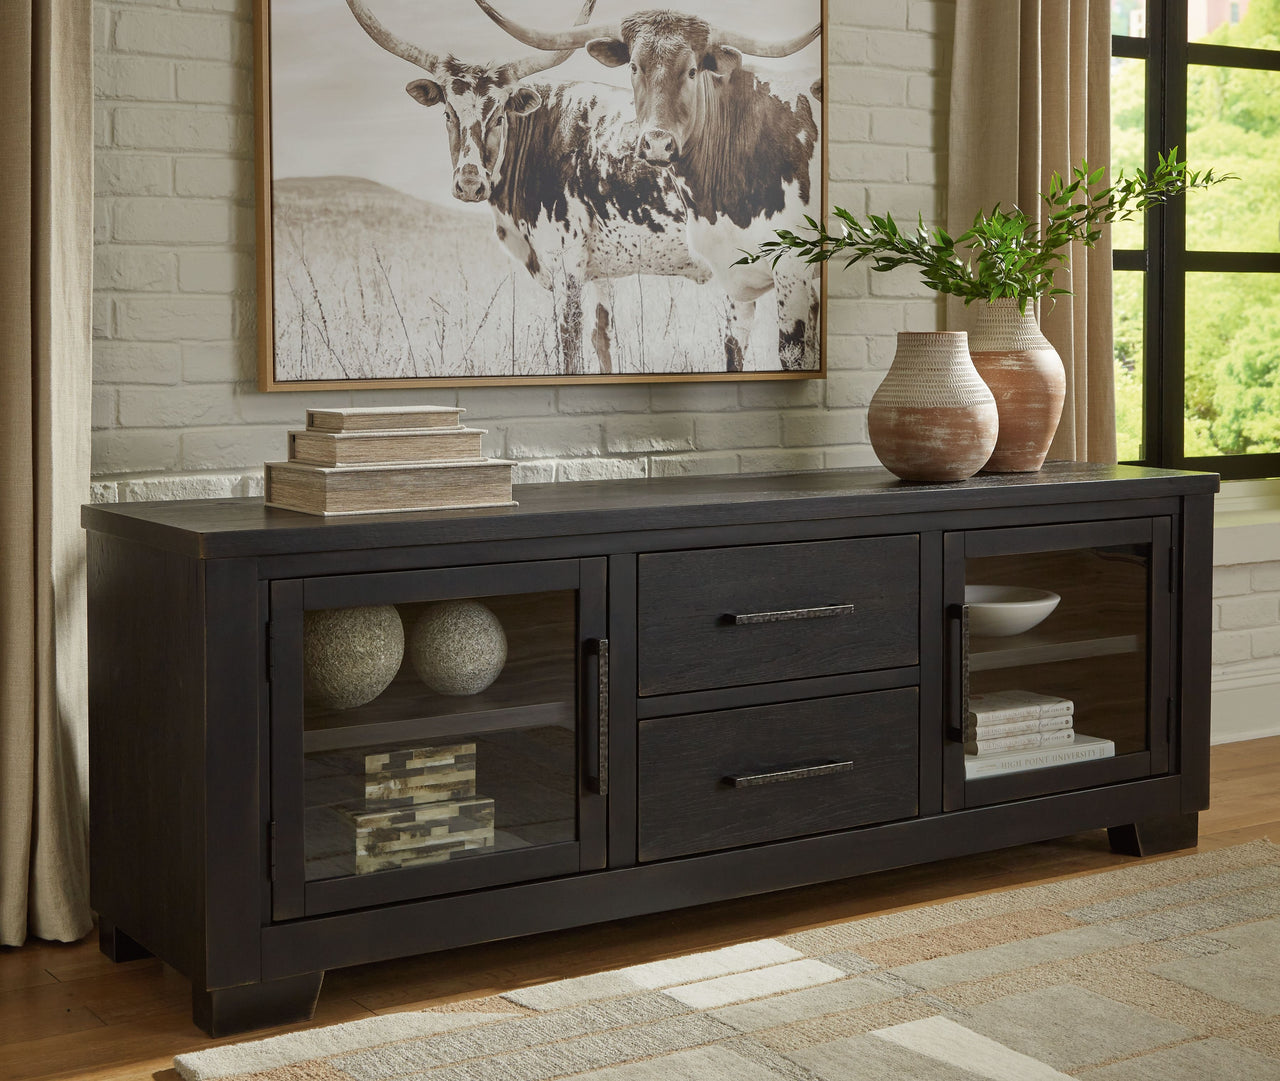 Galliden - Extra Large TV Stand - Tony's Home Furnishings